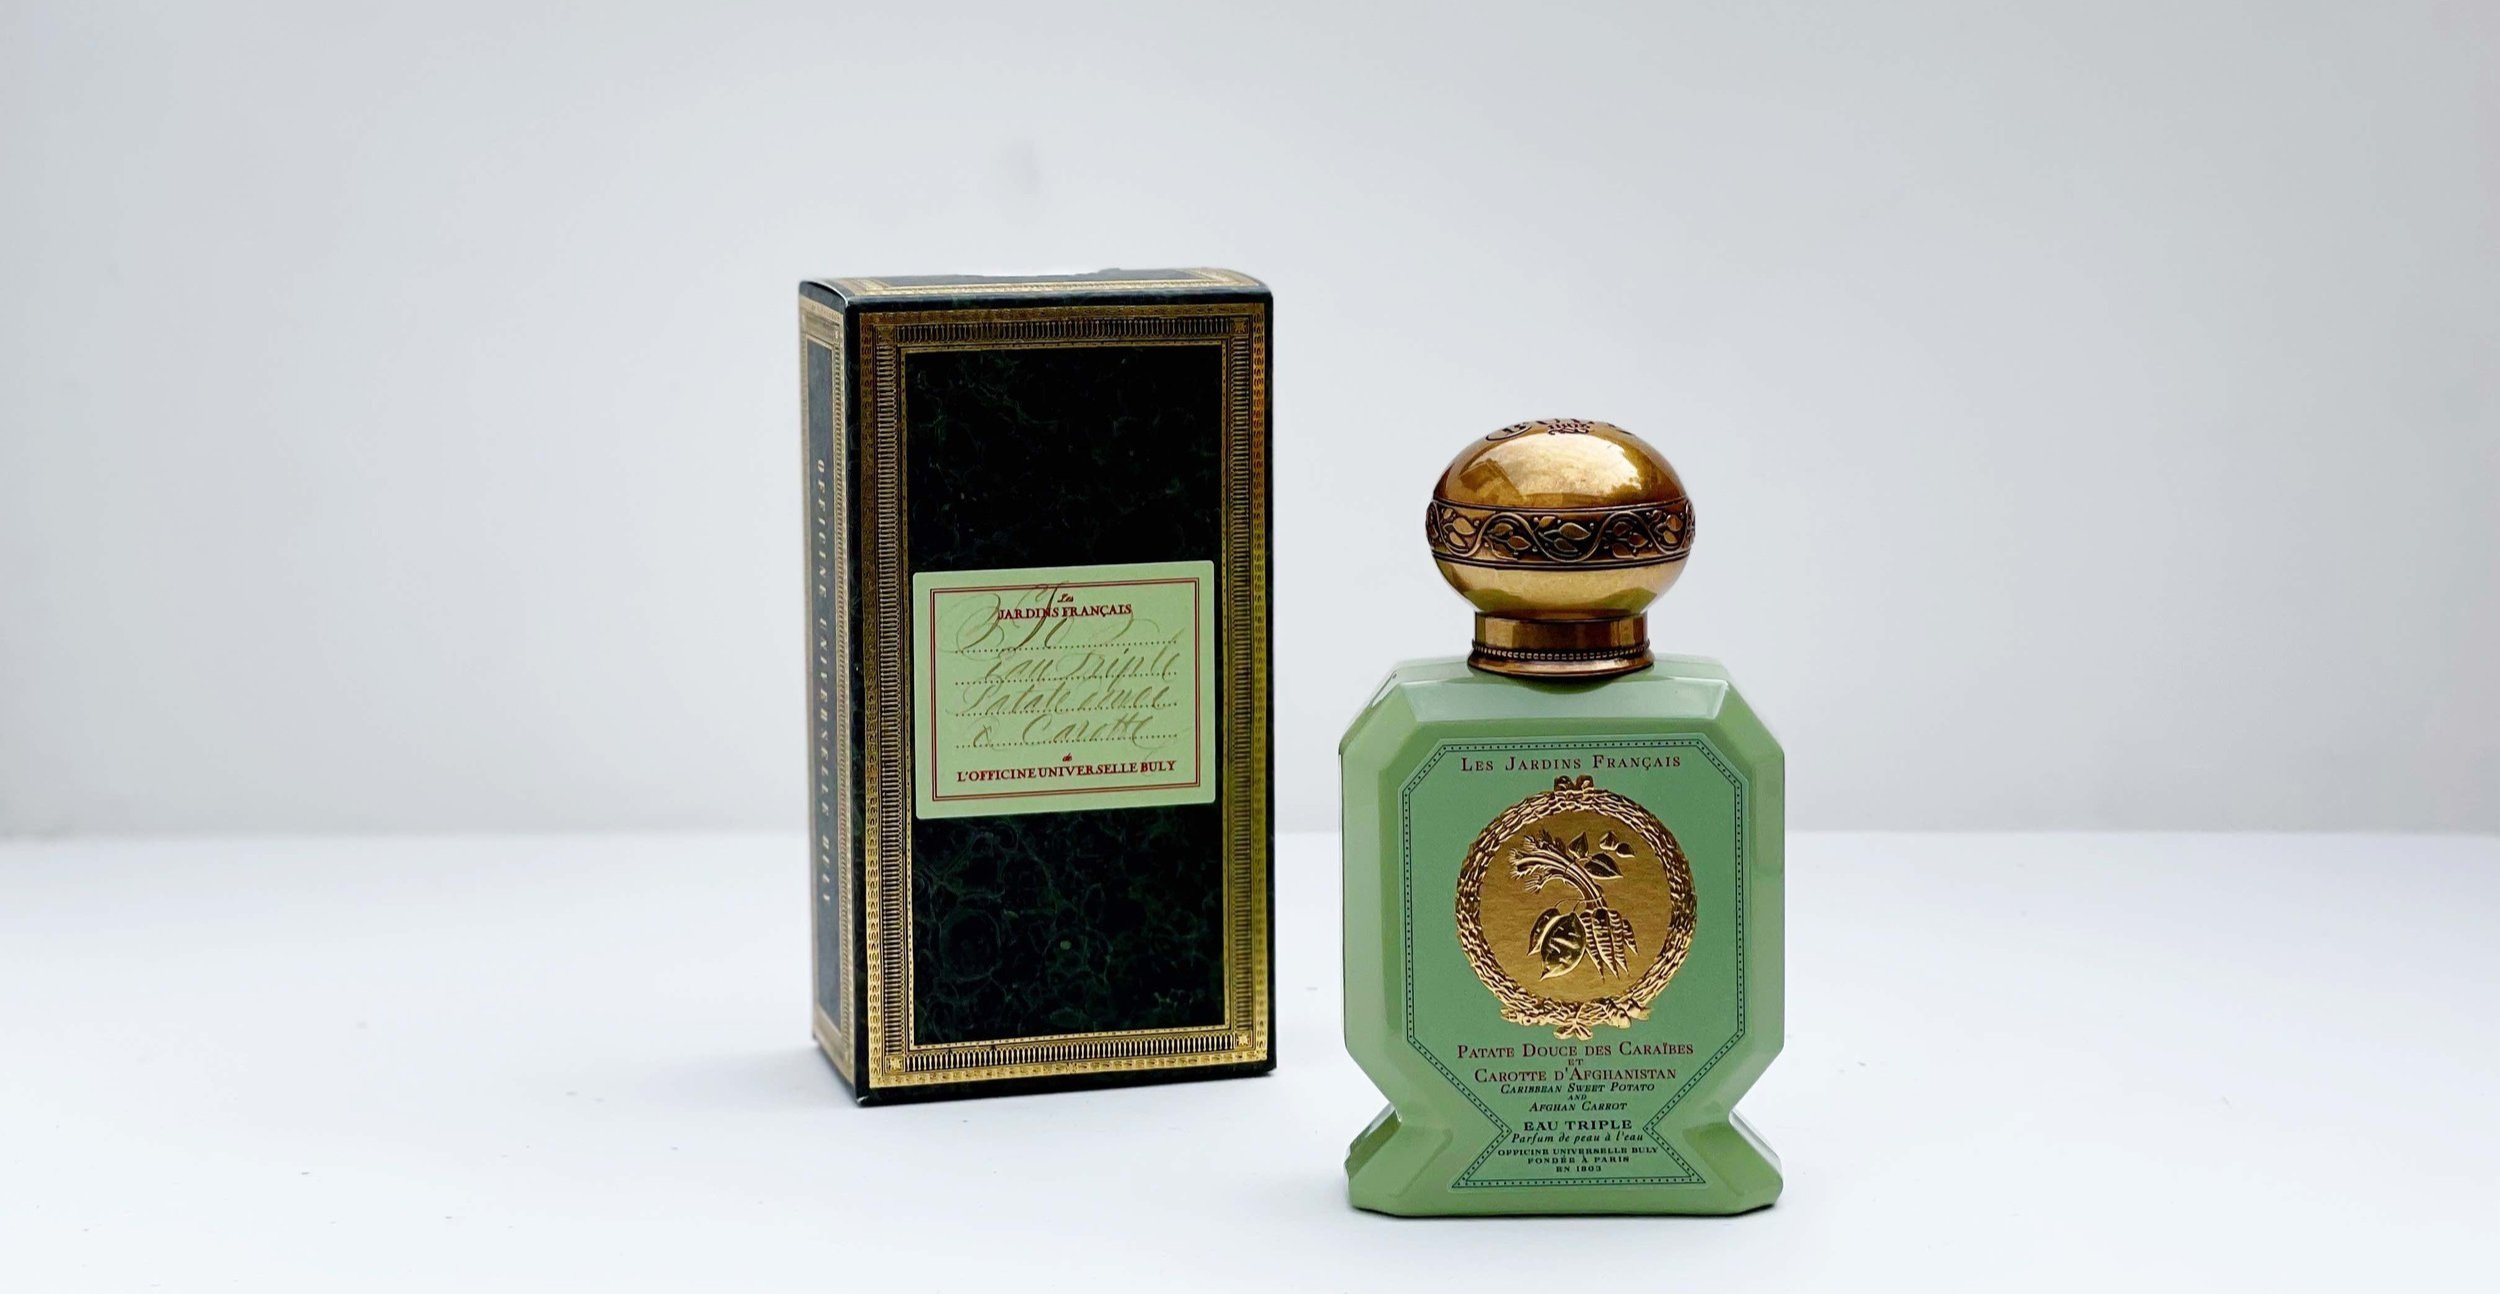 Officine Universelle Buly works vegetables into perfumes - Premium